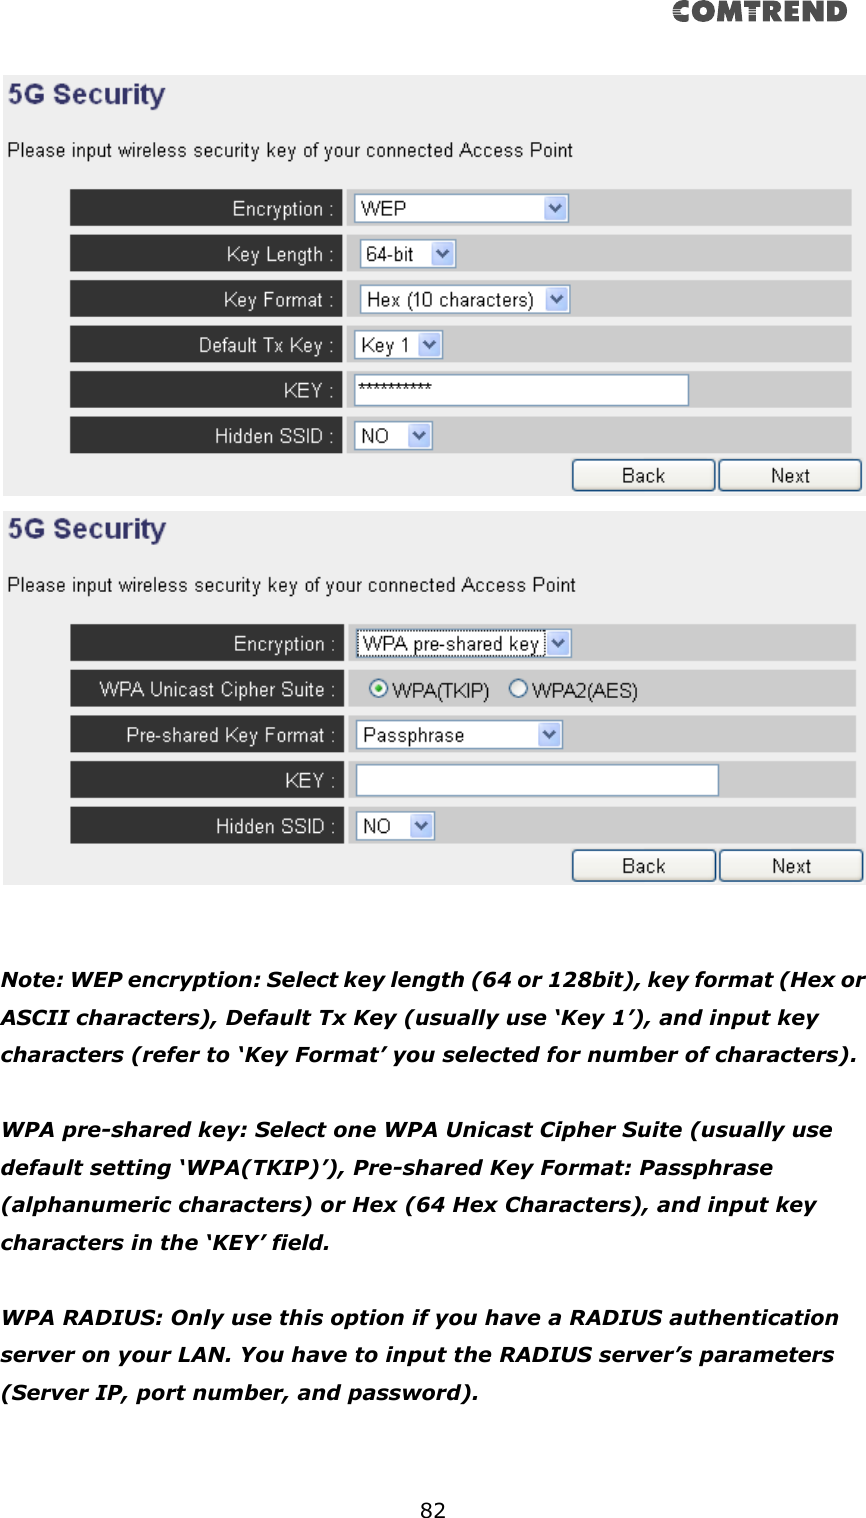       82      Note: WEP encryption: Select key length (64 or 128bit), key format (Hex or ASCII characters), Default Tx Key (usually use ‘Key 1’), and input key characters (refer to ‘Key Format’ you selected for number of characters).  WPA pre-shared key: Select one WPA Unicast Cipher Suite (usually use default setting ‘WPA(TKIP)’), Pre-shared Key Format: Passphrase (alphanumeric characters) or Hex (64 Hex Characters), and input key characters in the ‘KEY’ field.  WPA RADIUS: Only use this option if you have a RADIUS authentication server on your LAN. You have to input the RADIUS server’s parameters (Server IP, port number, and password).   